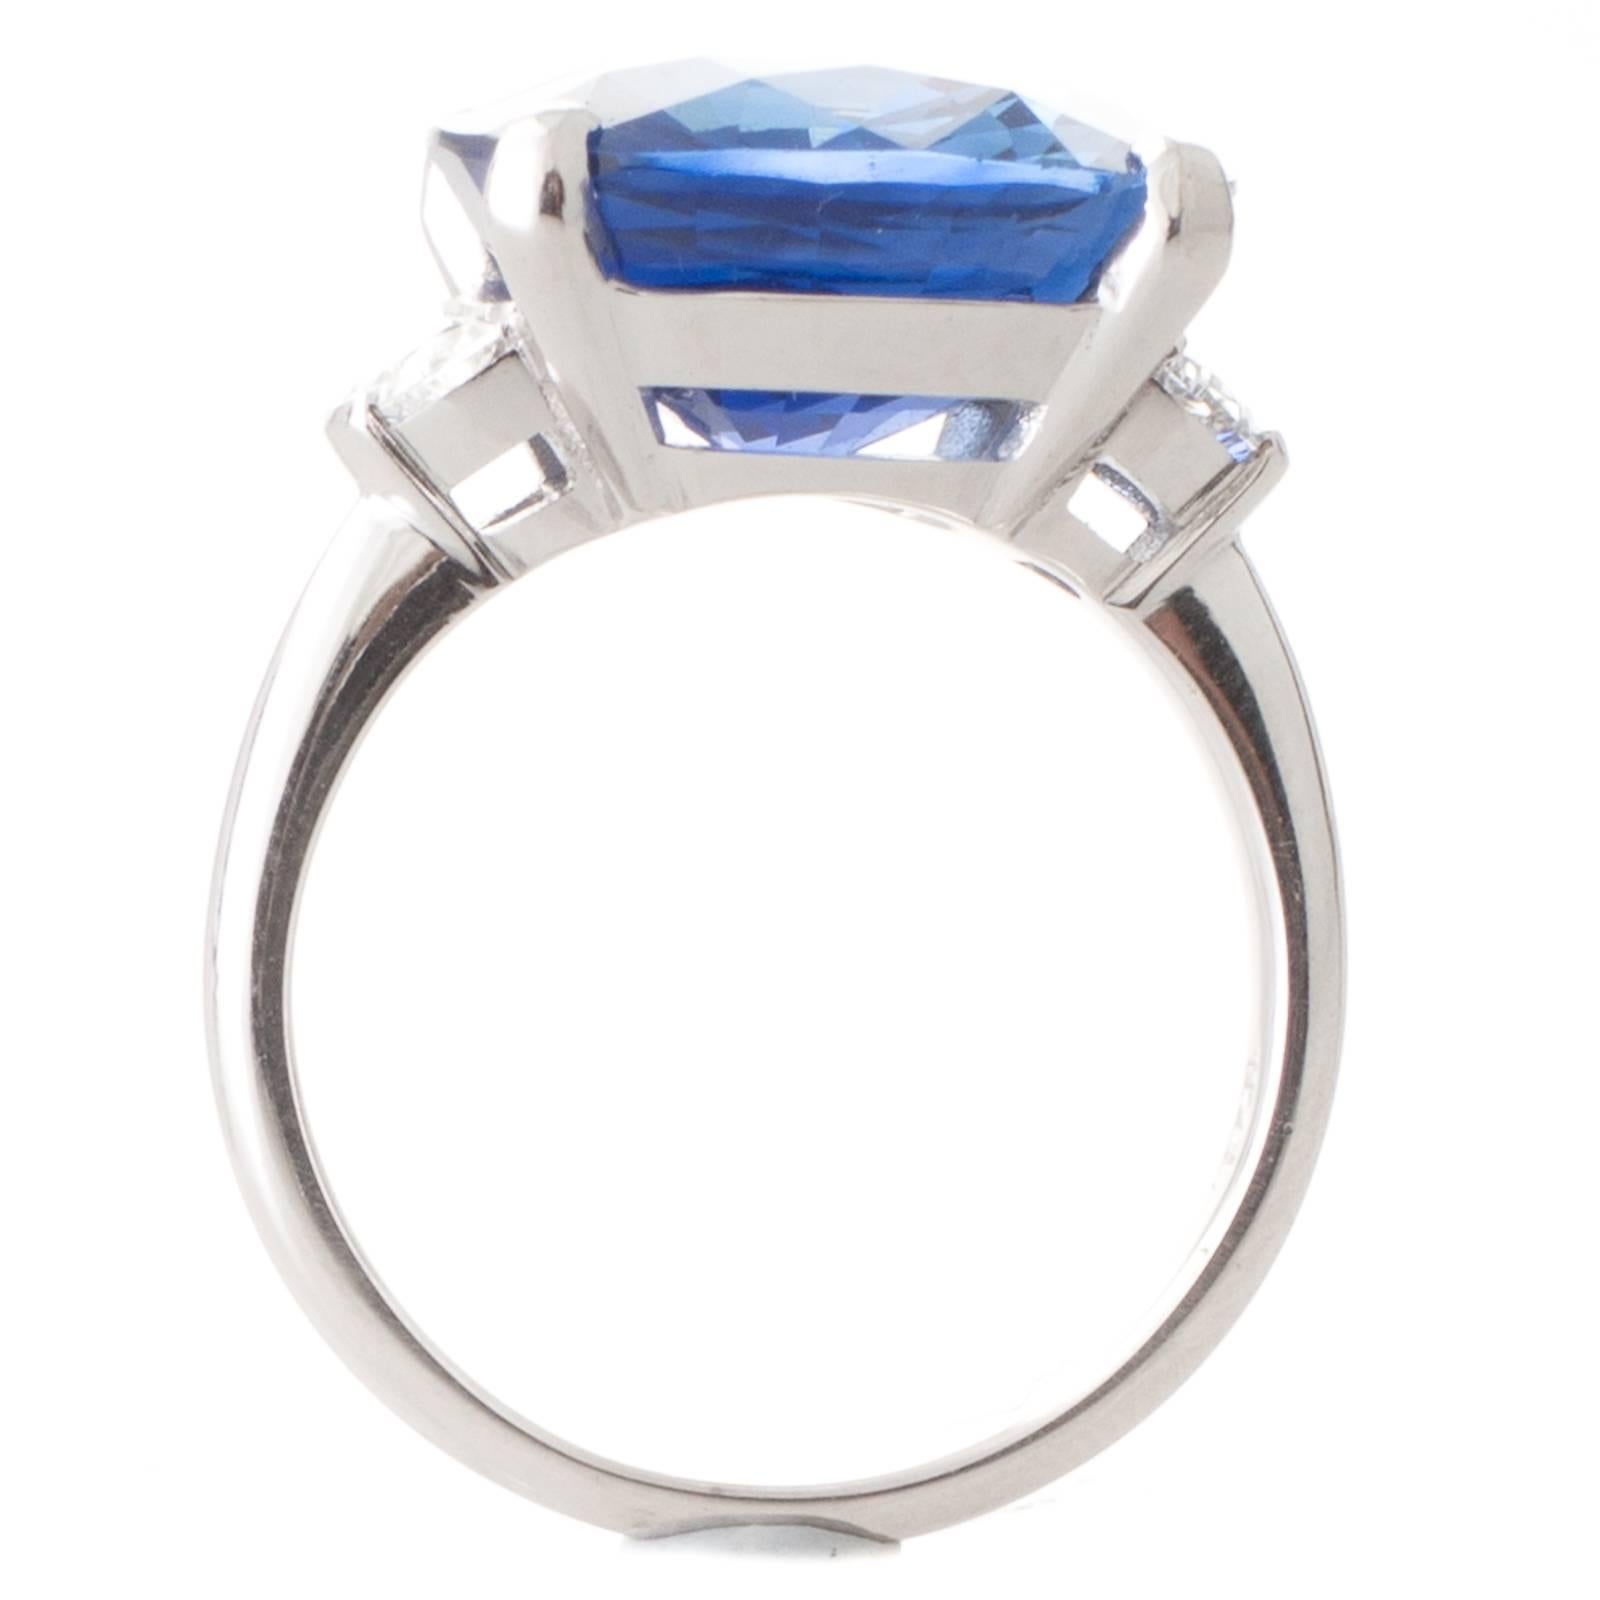 A handmade 18ct white gold ring, featuring a 12.01ct cushion cut sapphire accompanied by a GRS certificate stating origin as Sri Lankan, set in four claws between a pair of half moon cut diamonds totalling 0.36ct of colour G-H, clarity SI, all to a